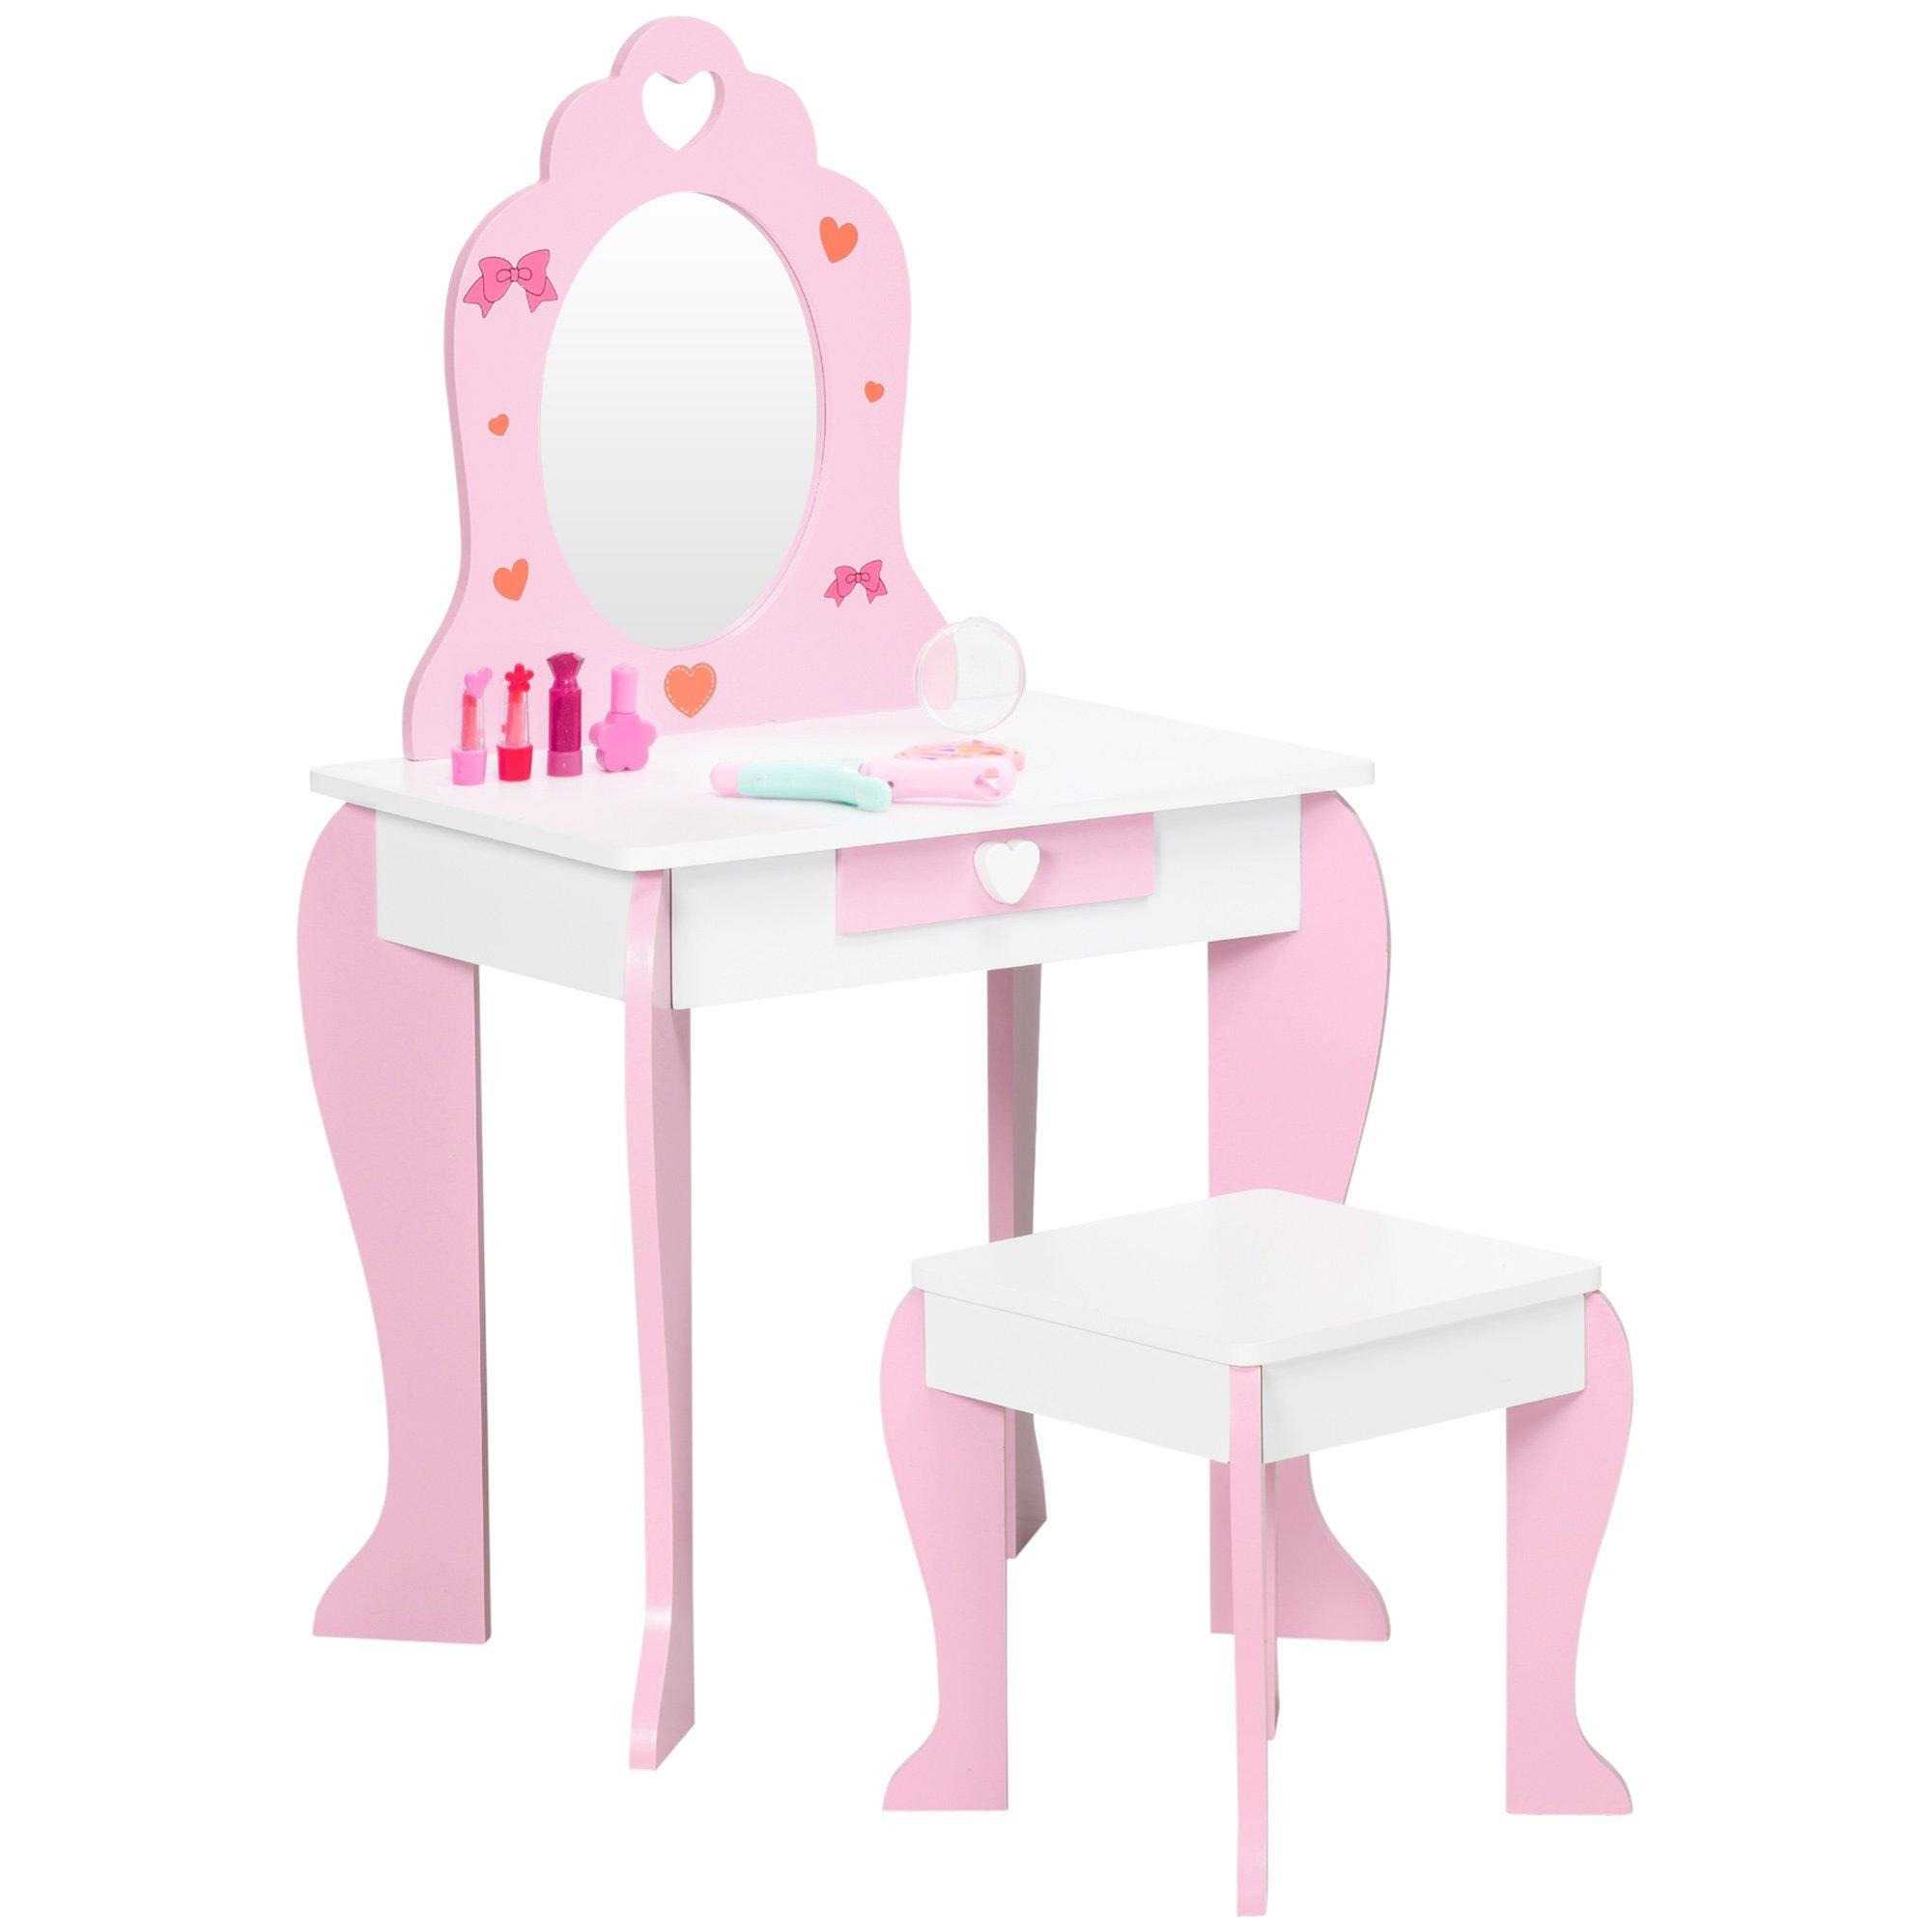 Kids Dressing Table with Mirror, Stool, Drawer, Cute Patterns - Pink - image 1